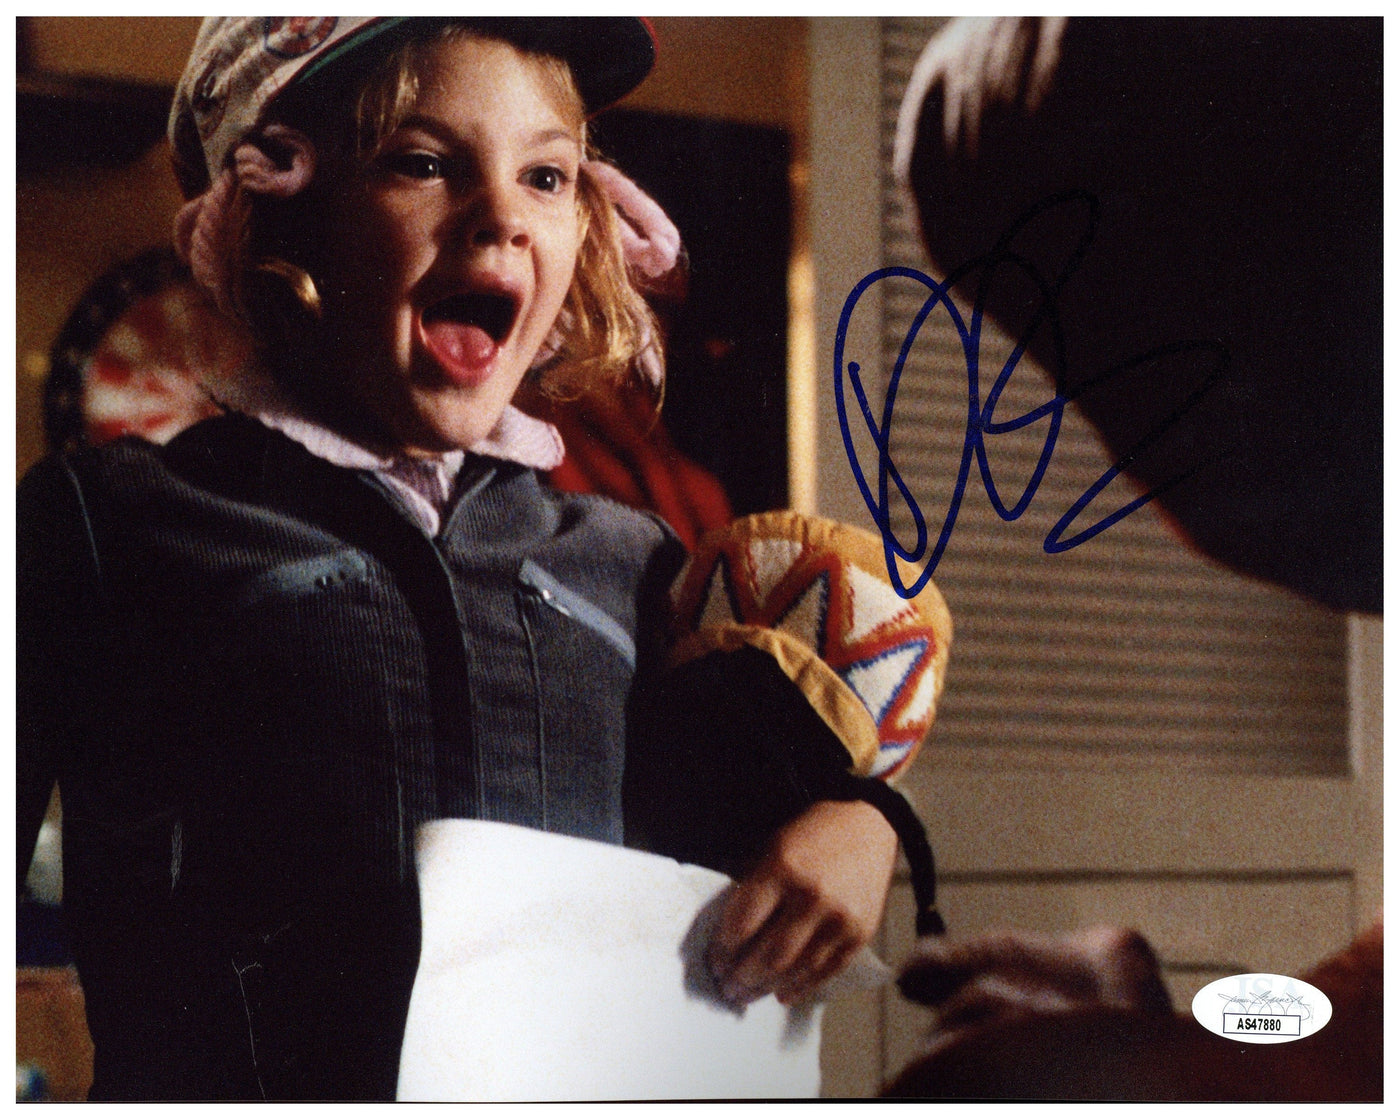 Drew Barrymore Signed 8x10 Photo E.T. The Extra-Terrestrial Autographed JSA COA